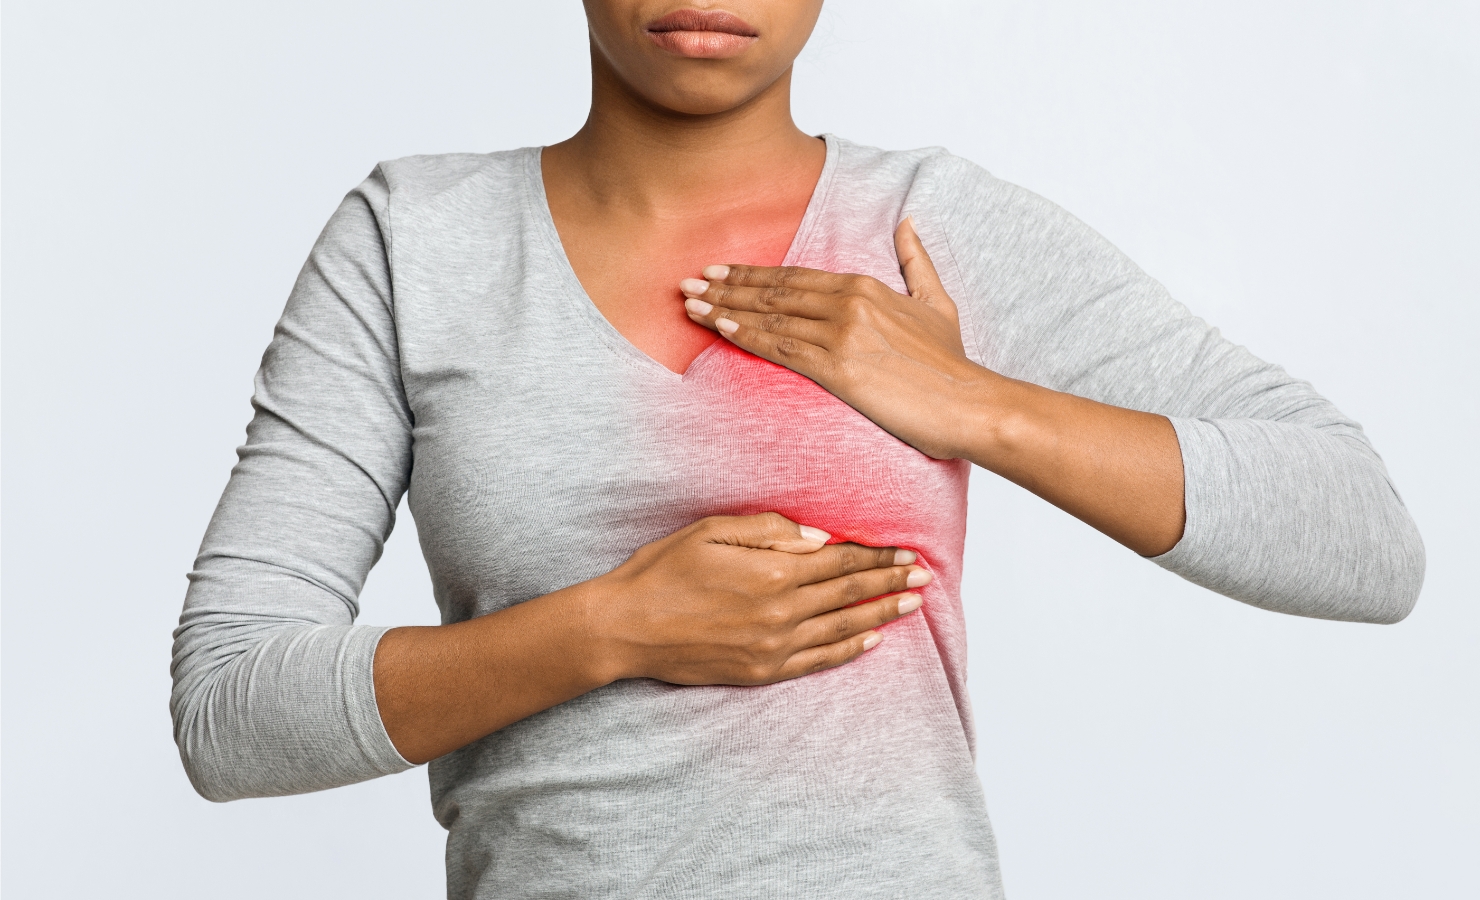 Breast Pain and Breast Tenderness: Why Do My Boobs Hurt?